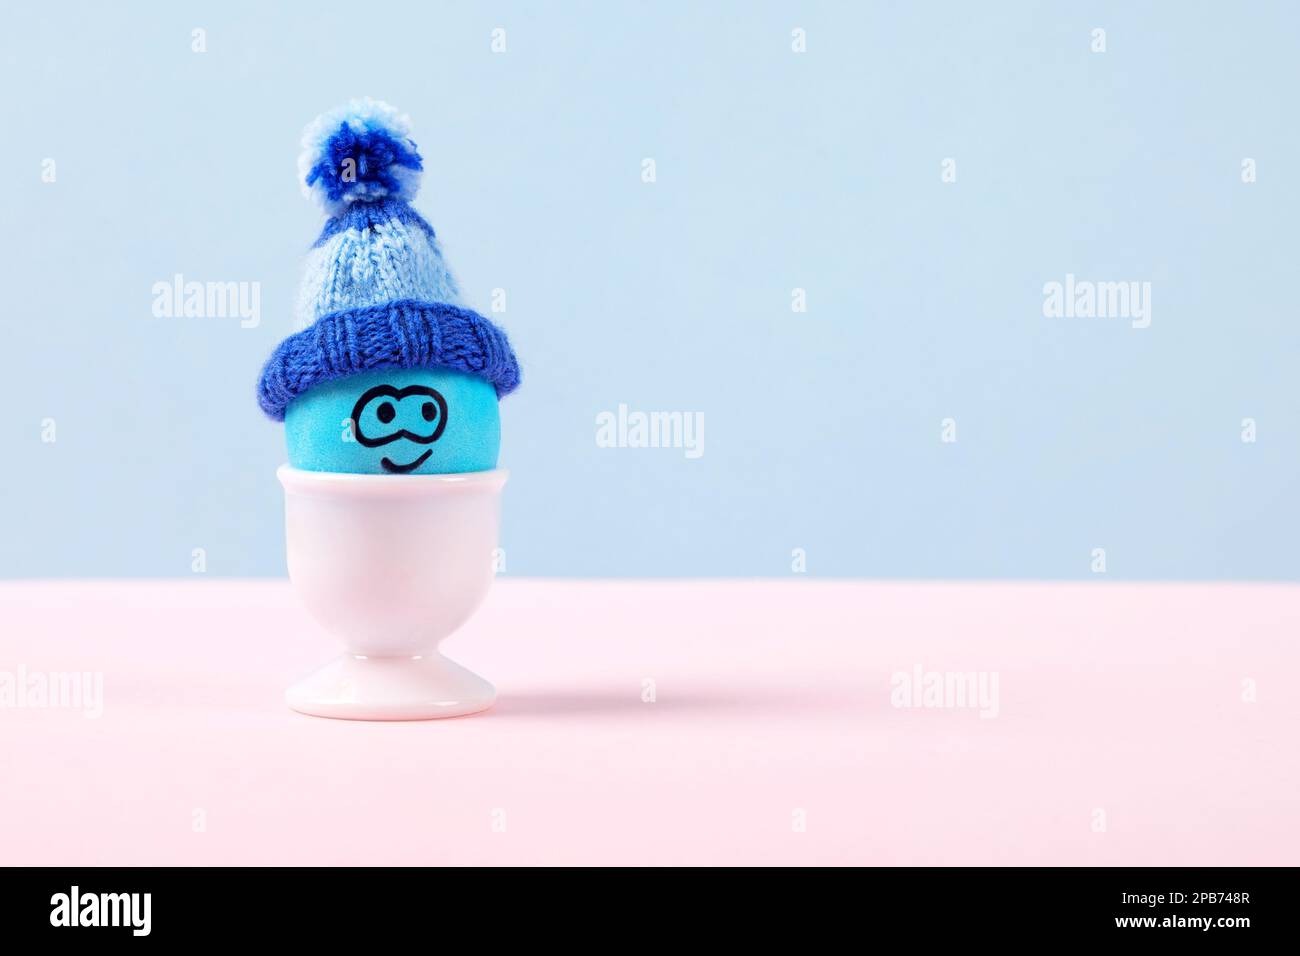 One blue Easter egg with funny face and crocheted hat in white stands on a pink table. Happy Easter concept. Greeting card. Stock Photo